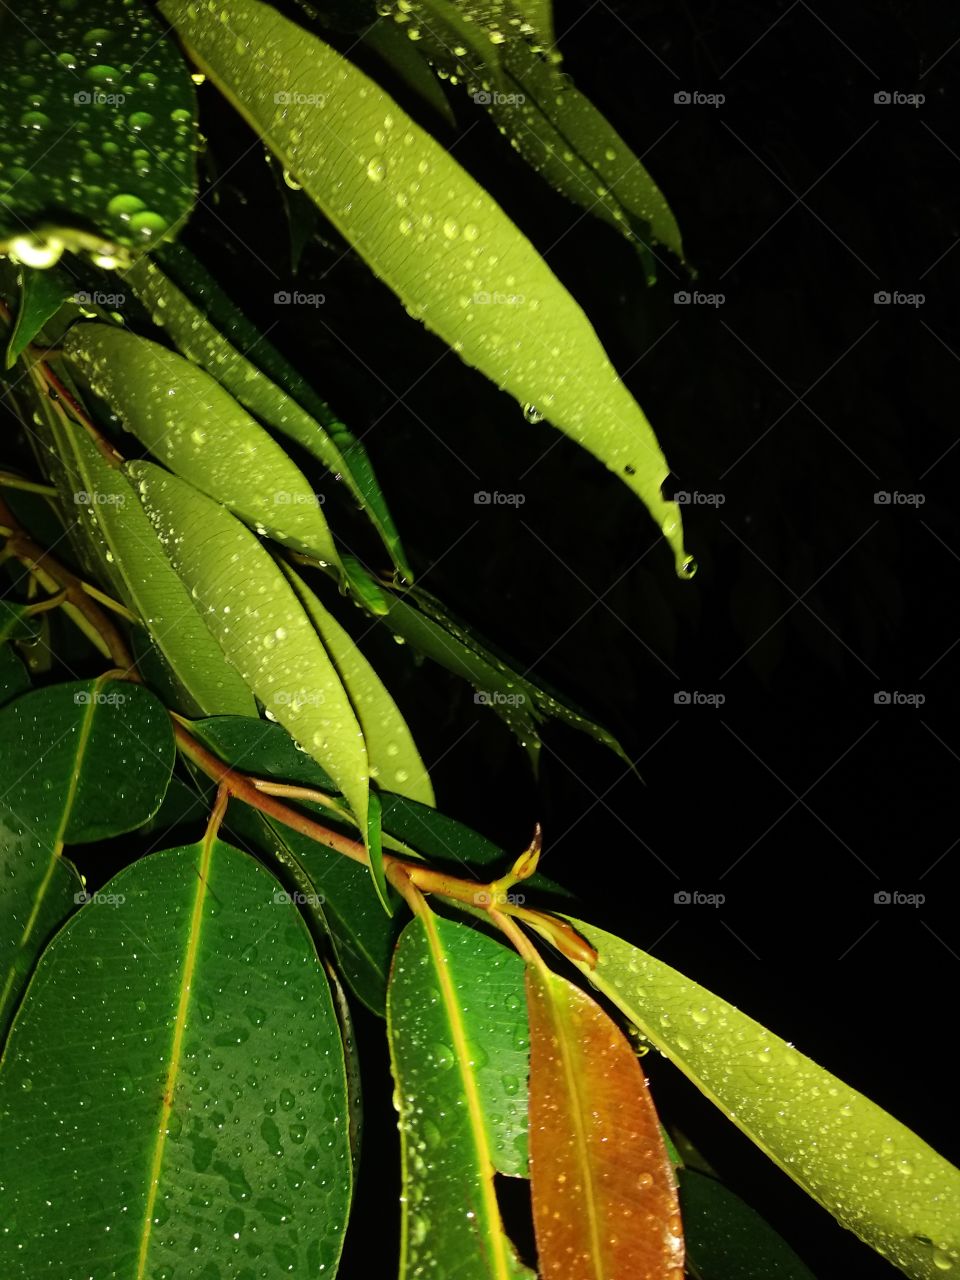 beautiful leaves with rain drops,leaves and raindrop image,dew drops on the leaves,black berry leaves in garden.